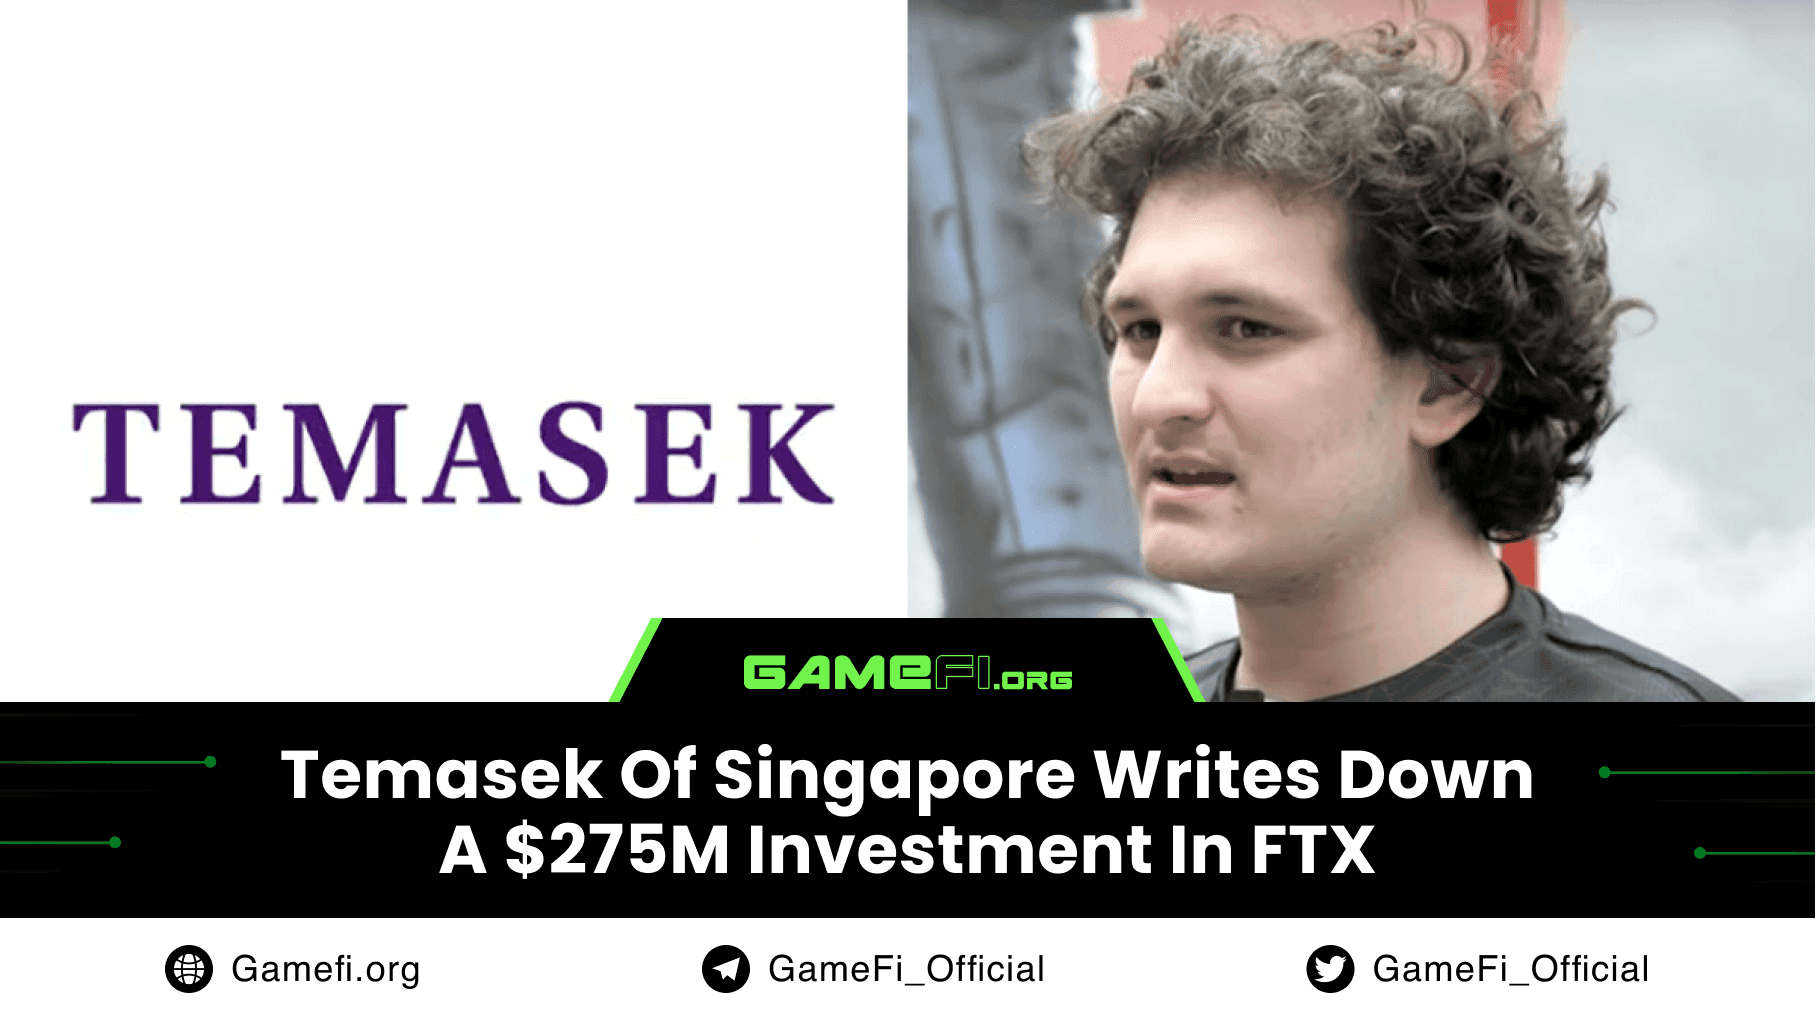 Temasek Of Singapore Writes Down A $275M Investment In FTX